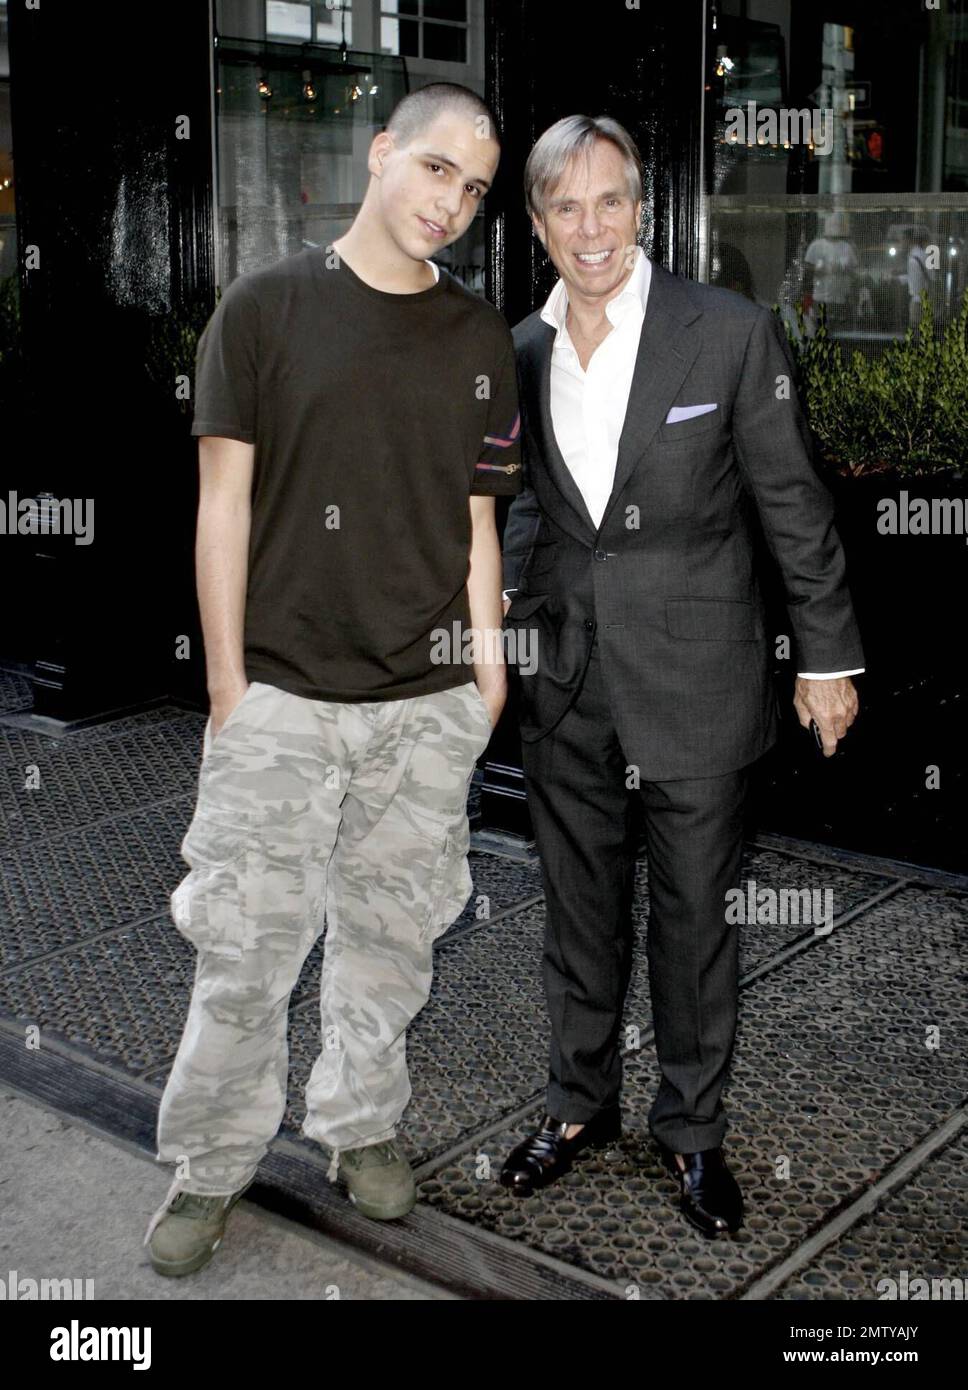 Tommy Hilfiger and son Rich, who is co-ceo of Young Rich and Famous  Entertainment, make their way back into a hotel in Soho, NY. 10/4/07. All  Stock Photo - Alamy